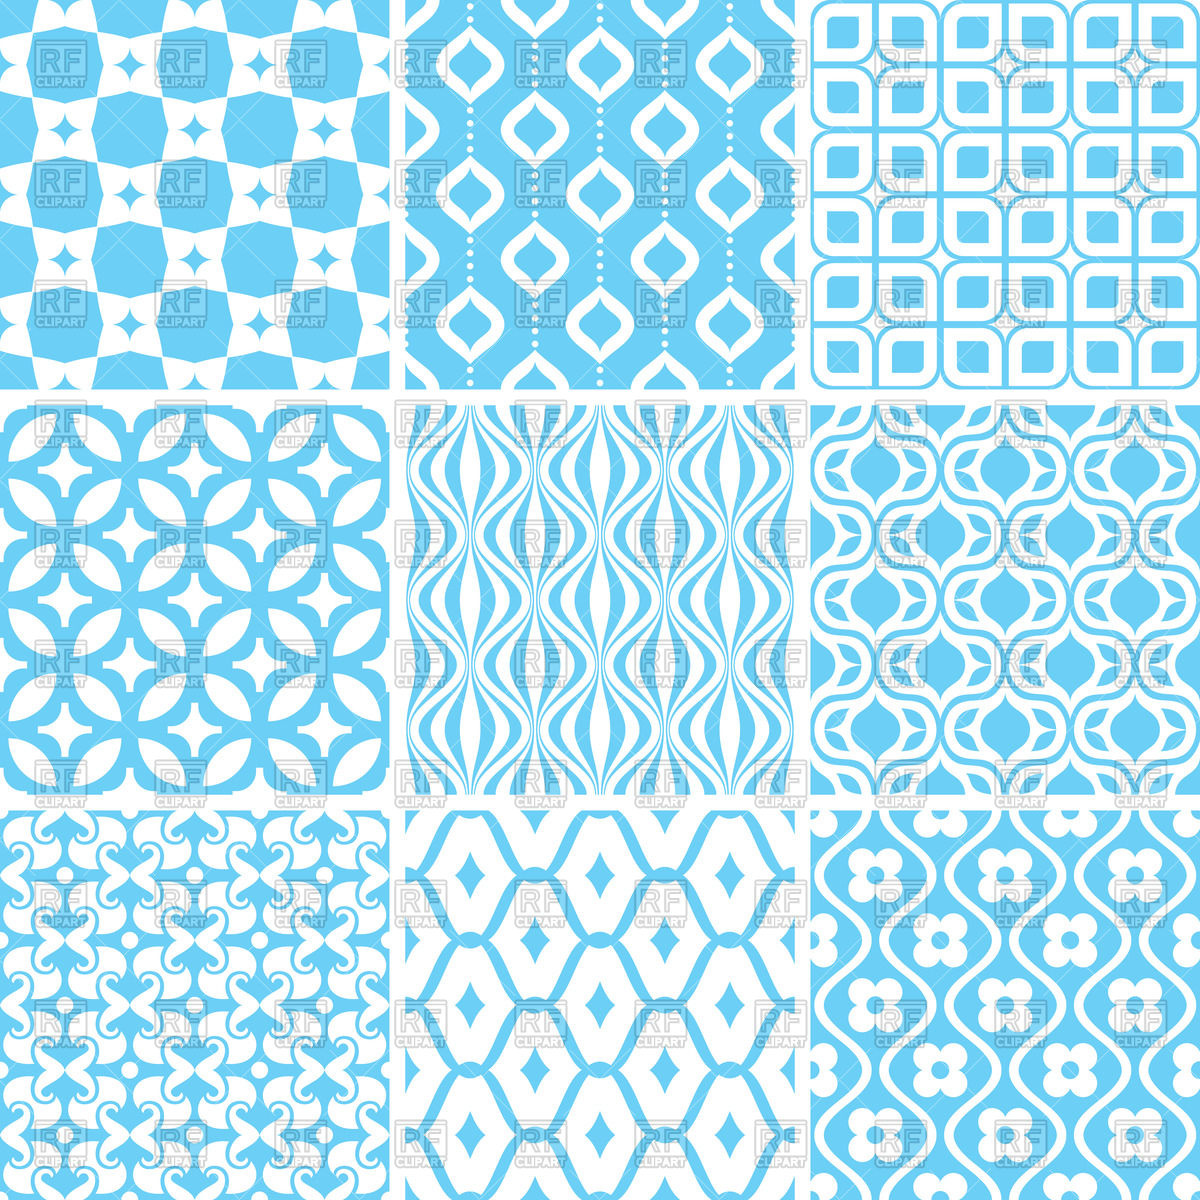 Seamless Blue Wallpaper With Geometric Patterns Vector - Abstract Geometric Pattern Download , HD Wallpaper & Backgrounds